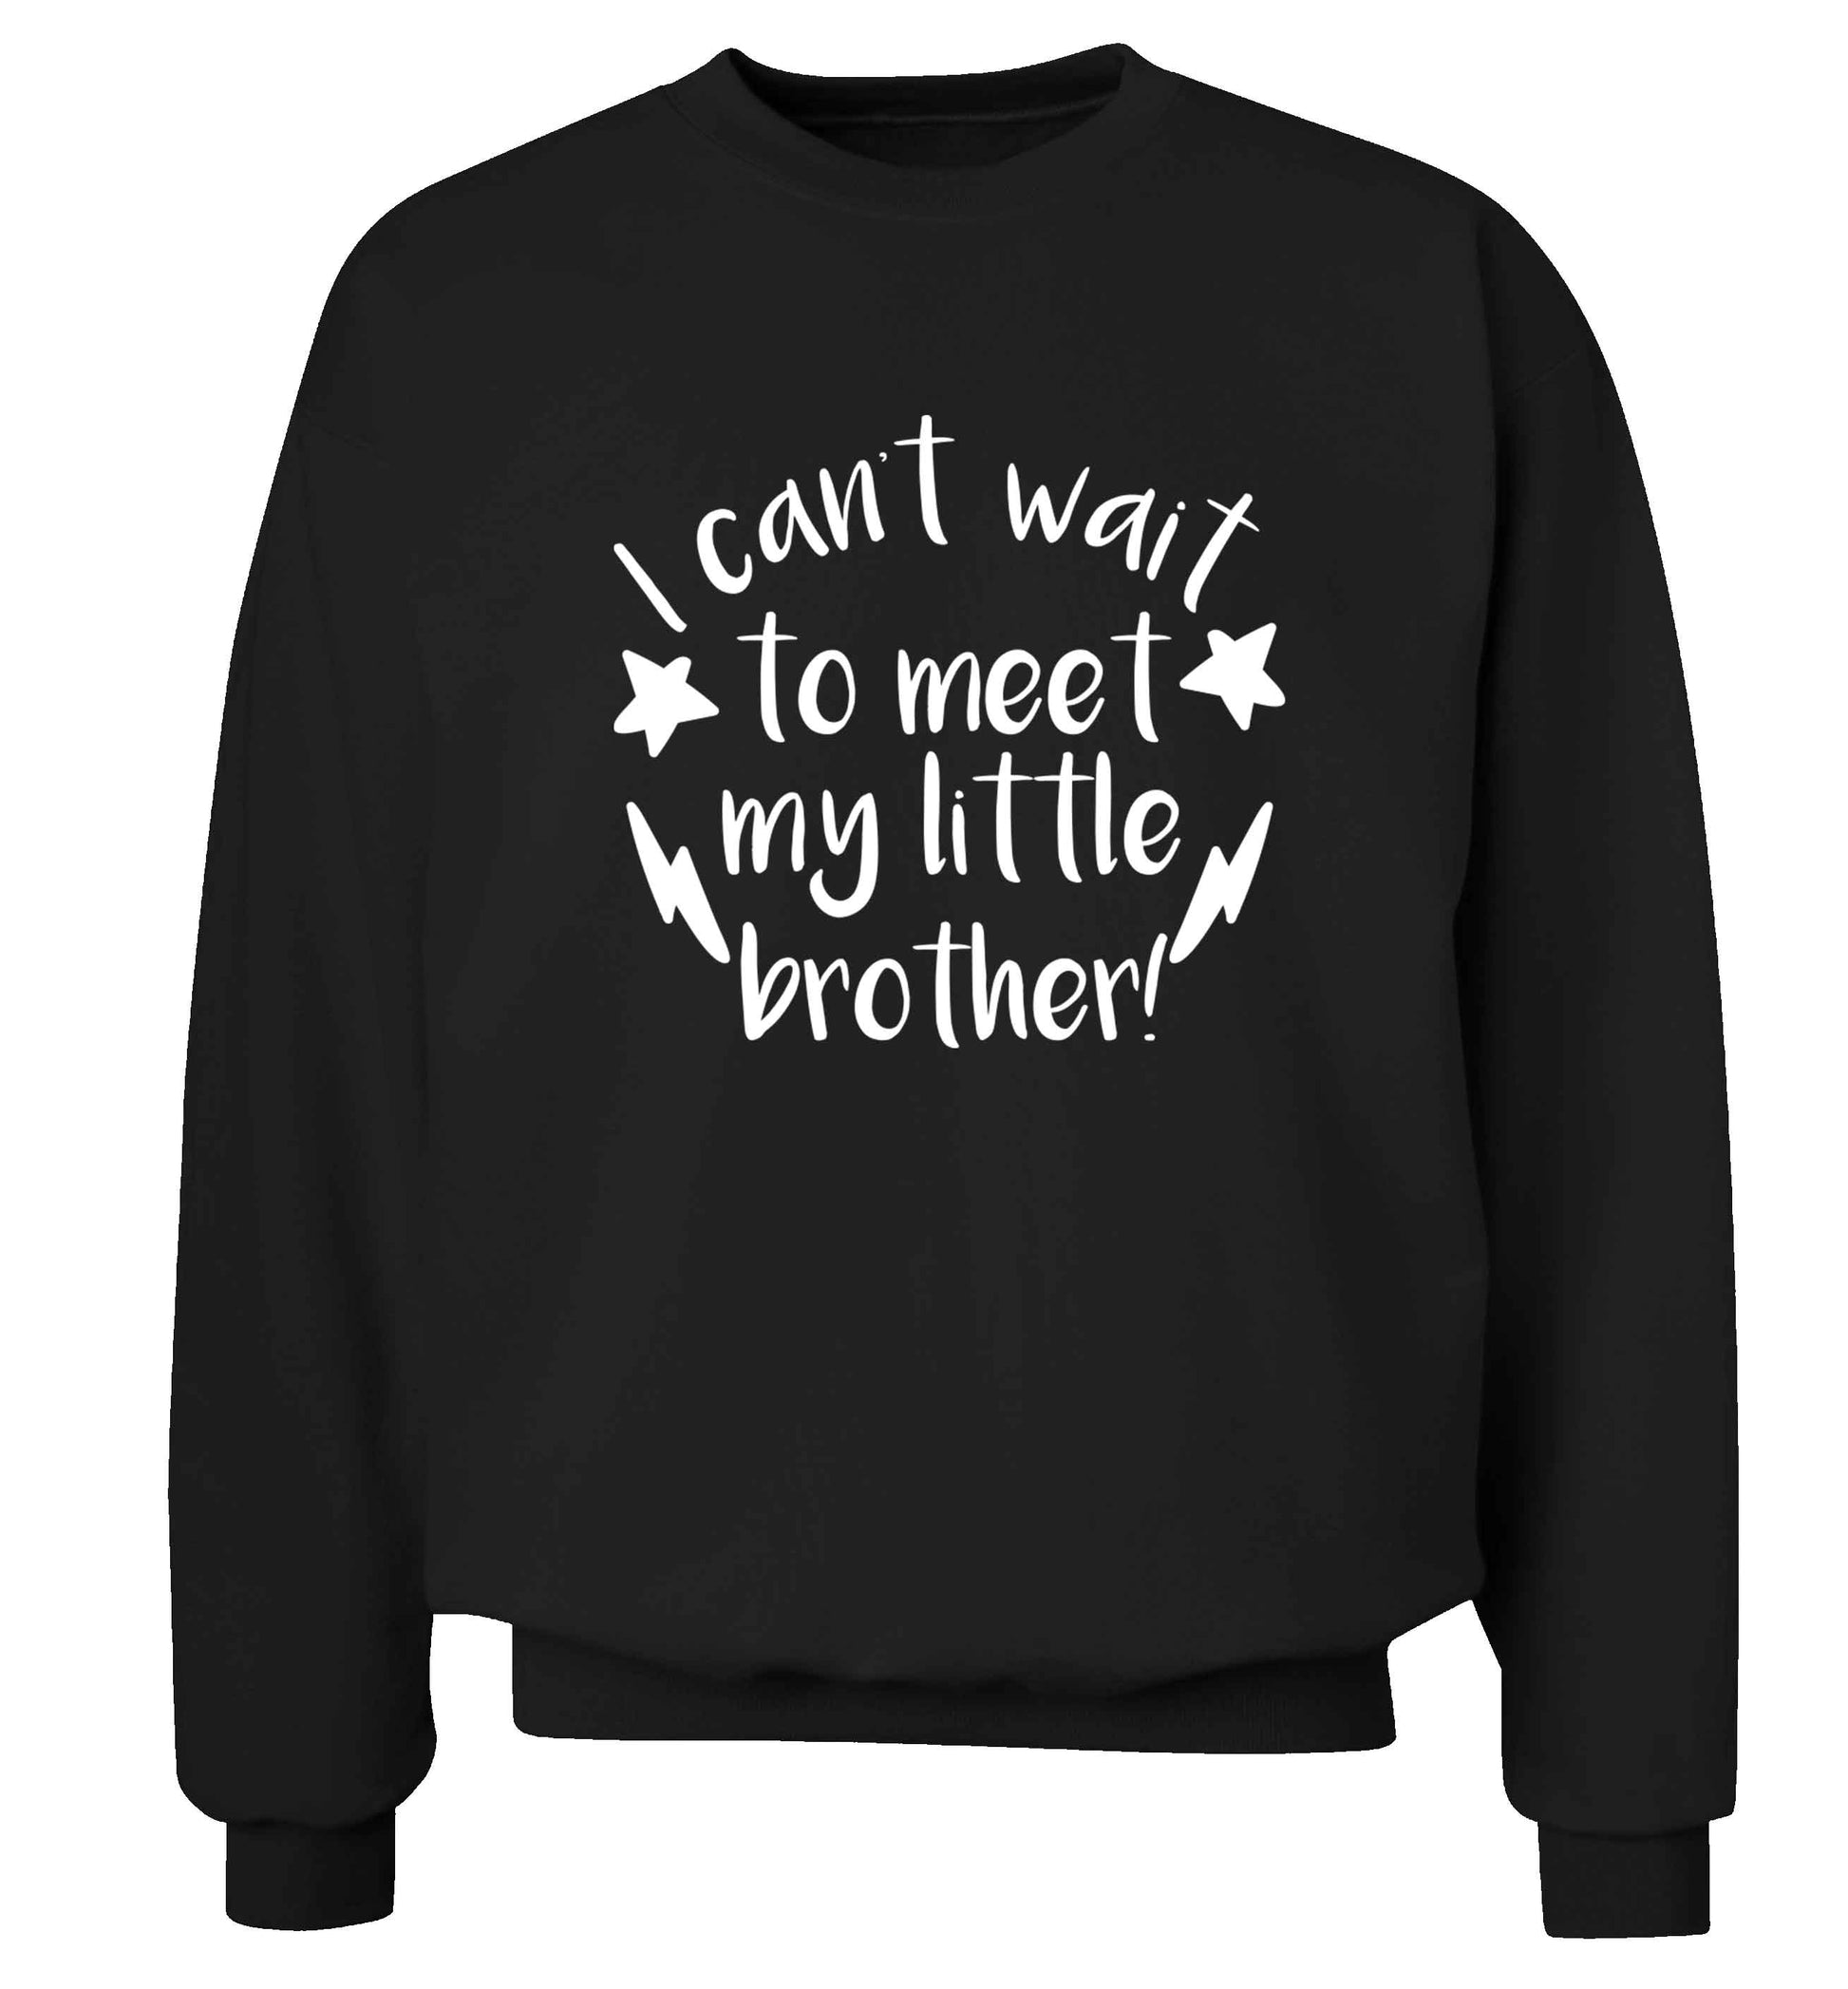 I can't wait to meet my sister! Adult's unisex black Sweater 2XL